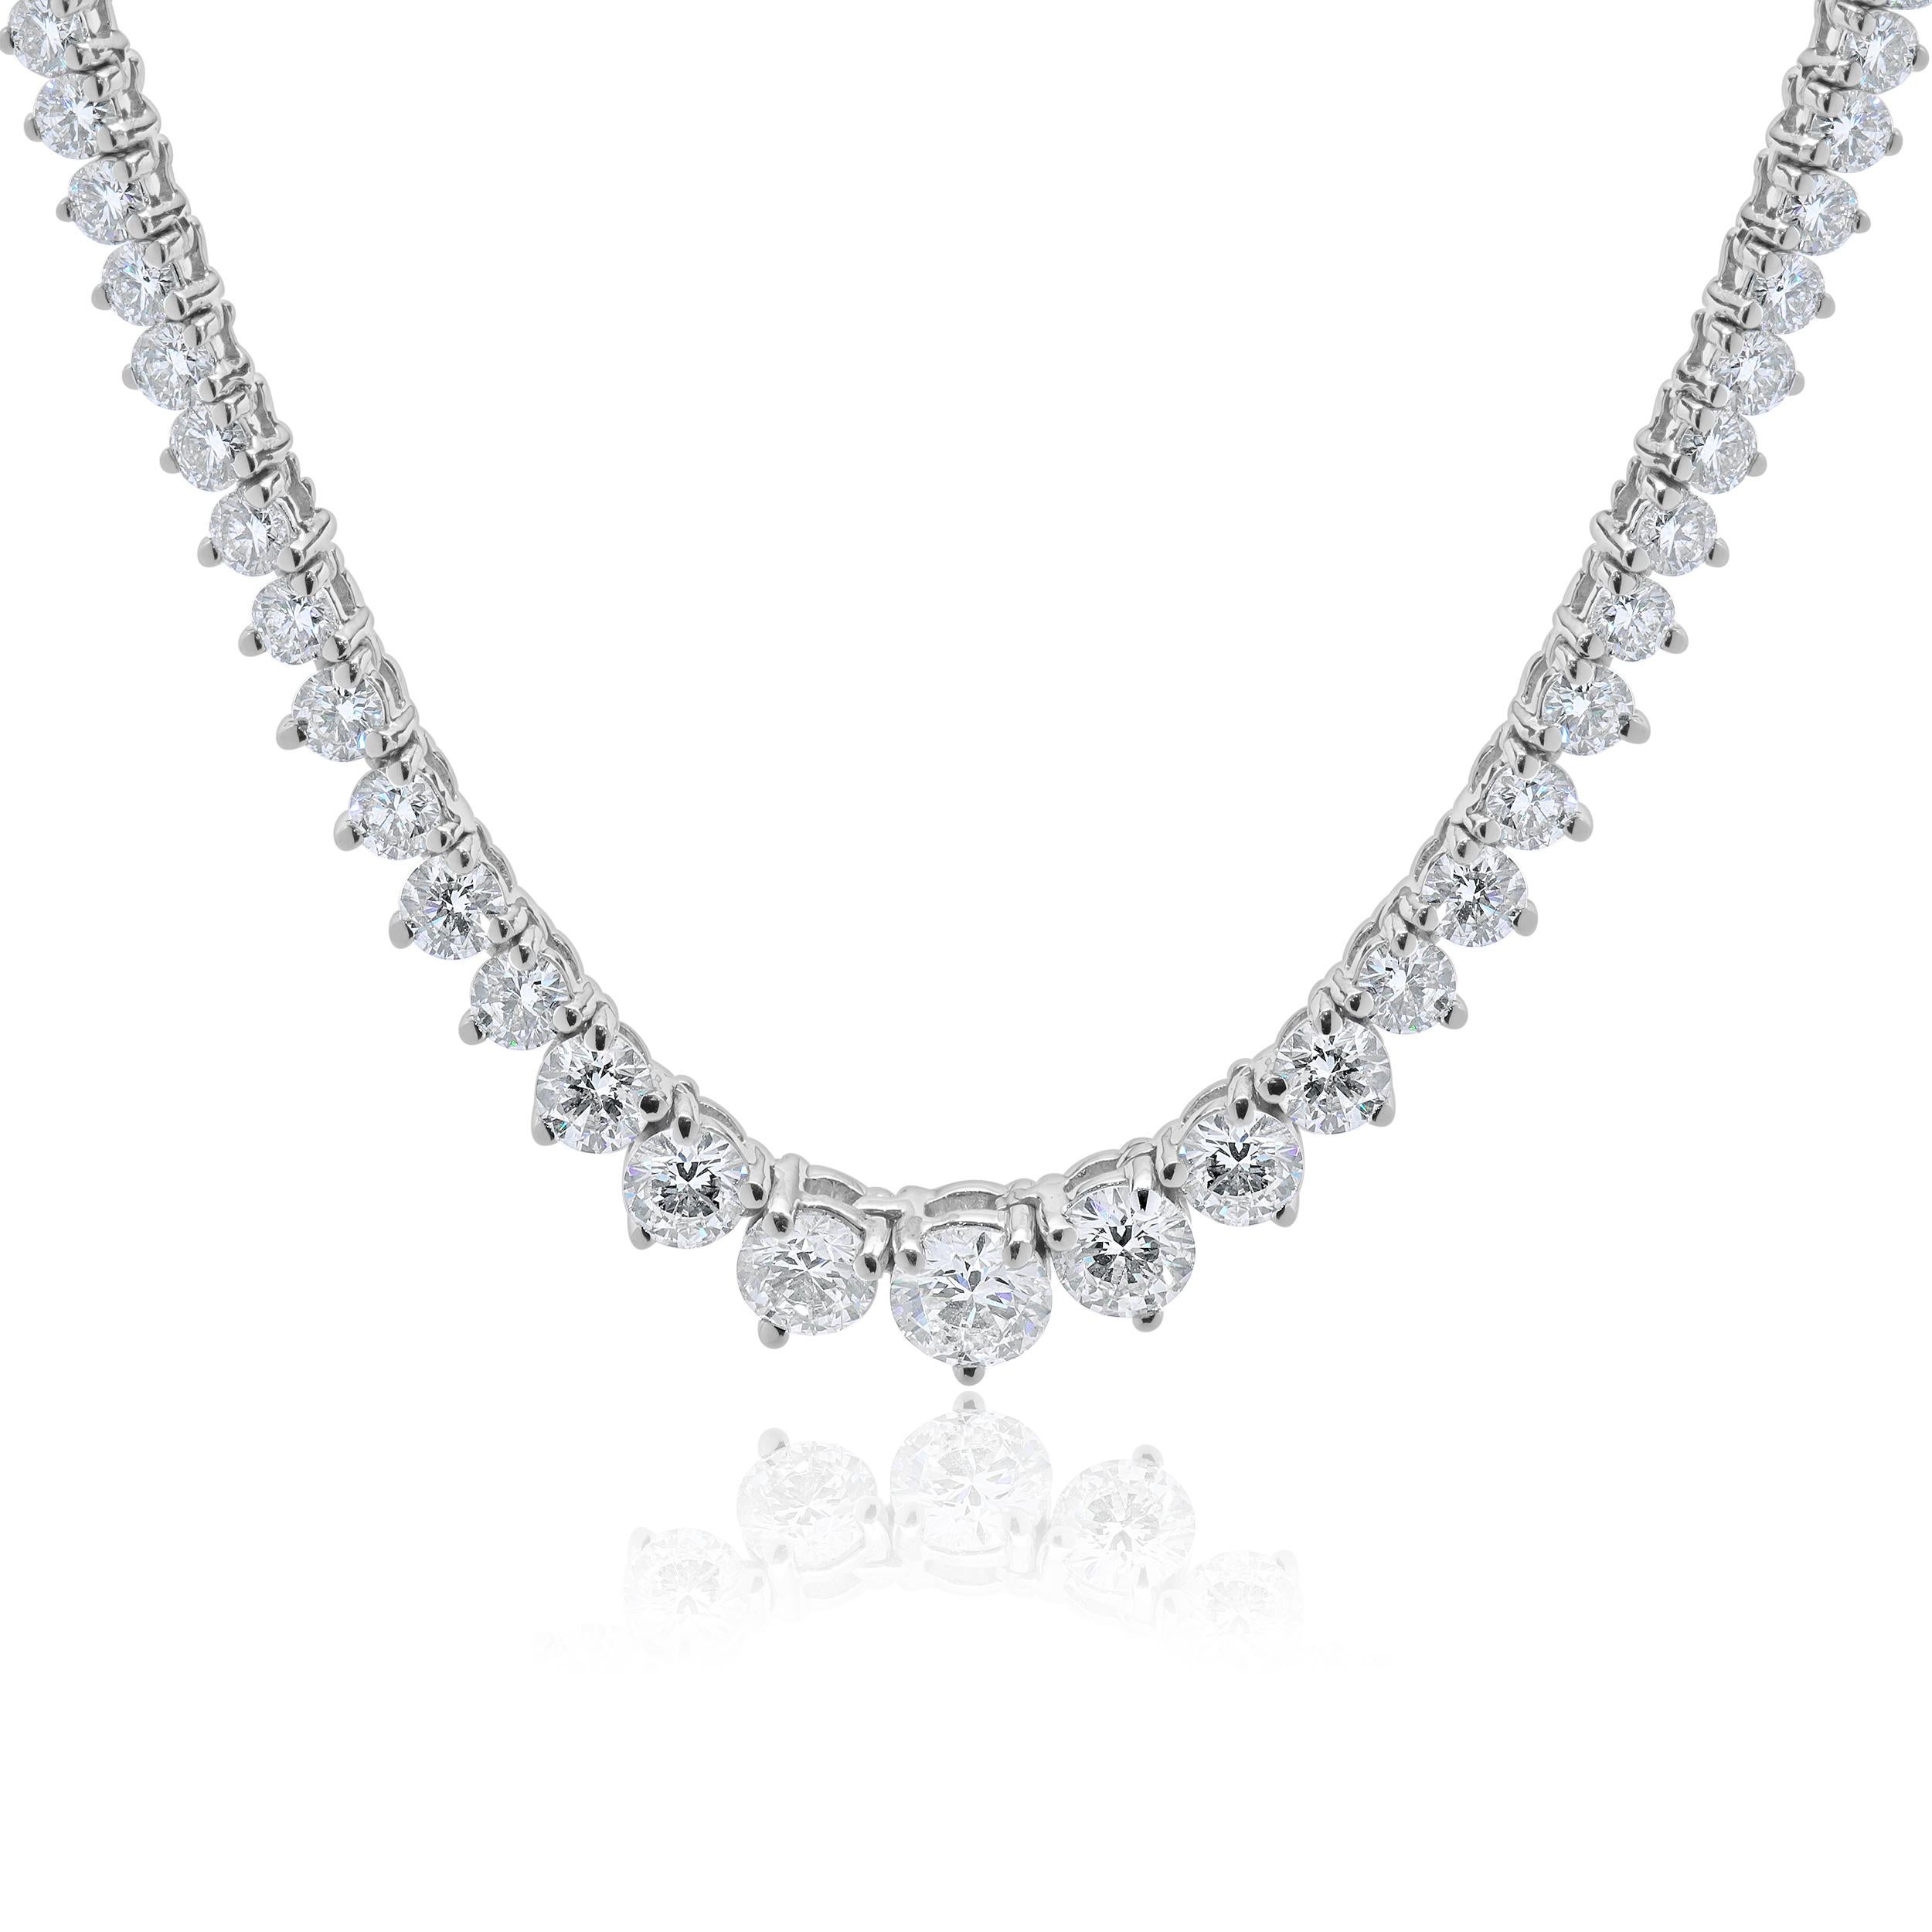 Designer: custom
Material: 18K white gold
Diamonds: 148 round brilliant cut = 10.00cttw
Color: H
Clarity: SI1
Dimensions: necklace measures 16-inches in length 
Weight: 25.90 grams